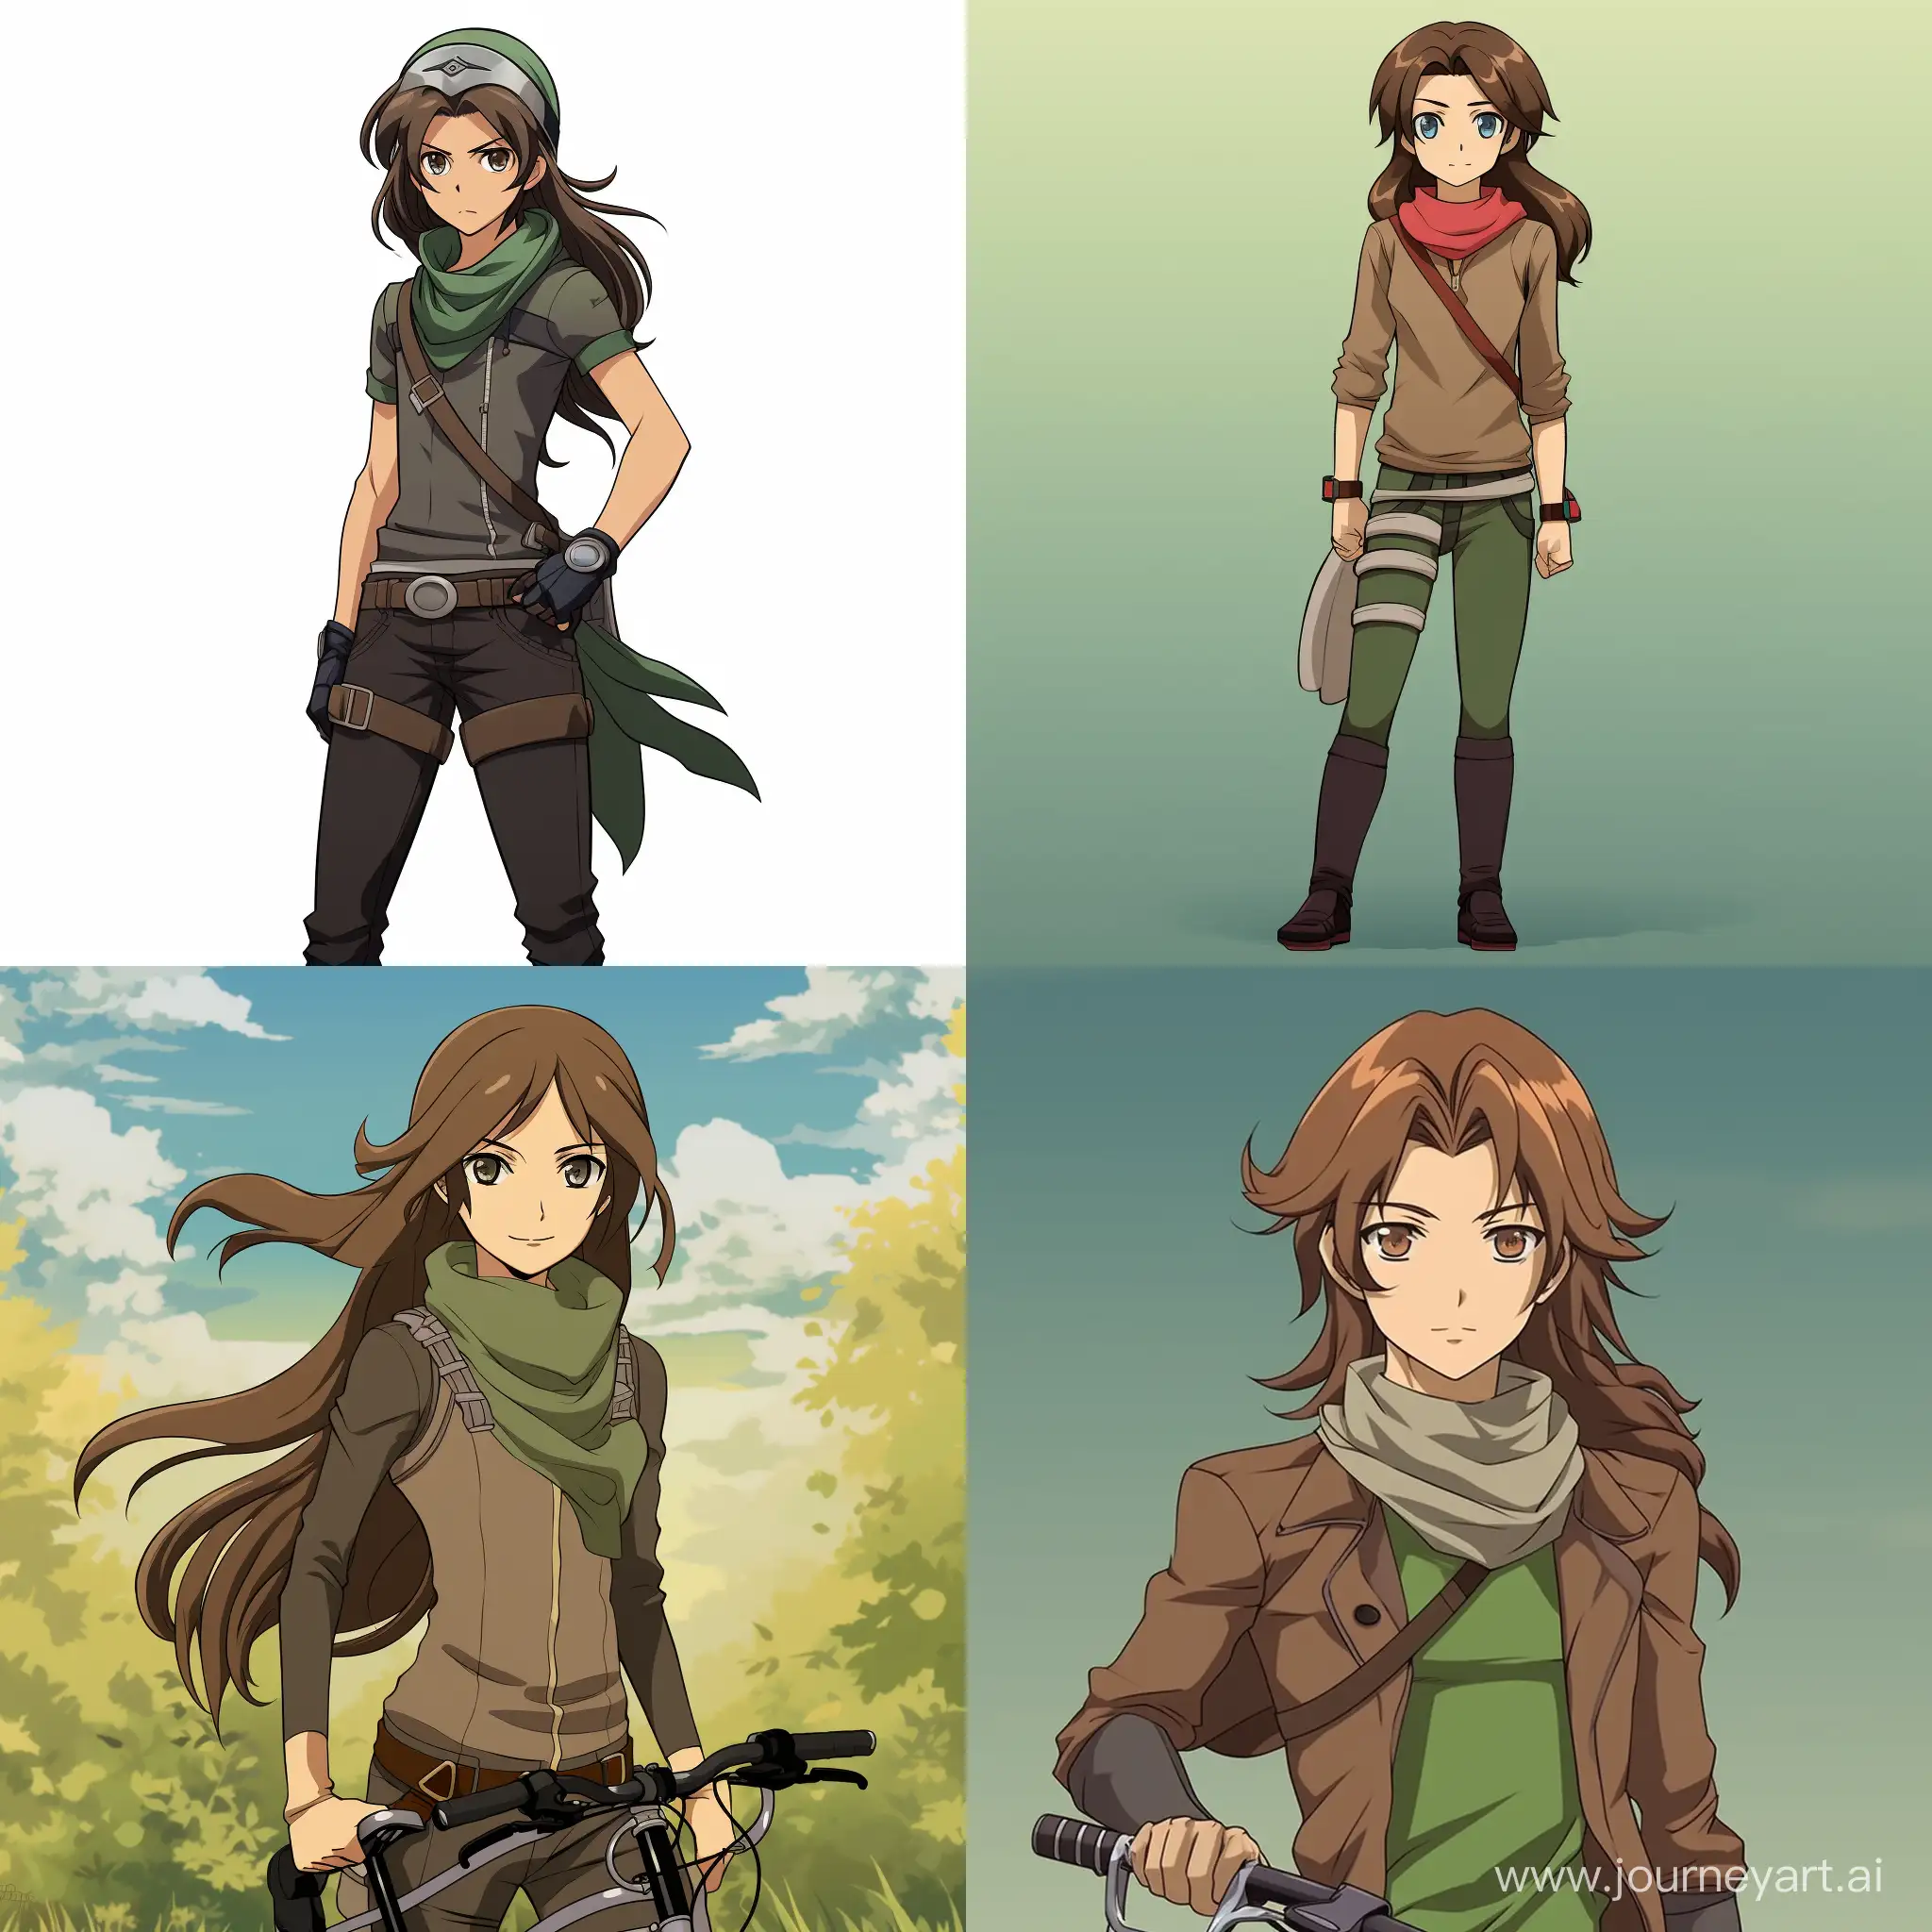 Anime-Boy-with-Brown-Hair-and-Green-Eyes-in-Stylish-Outfit